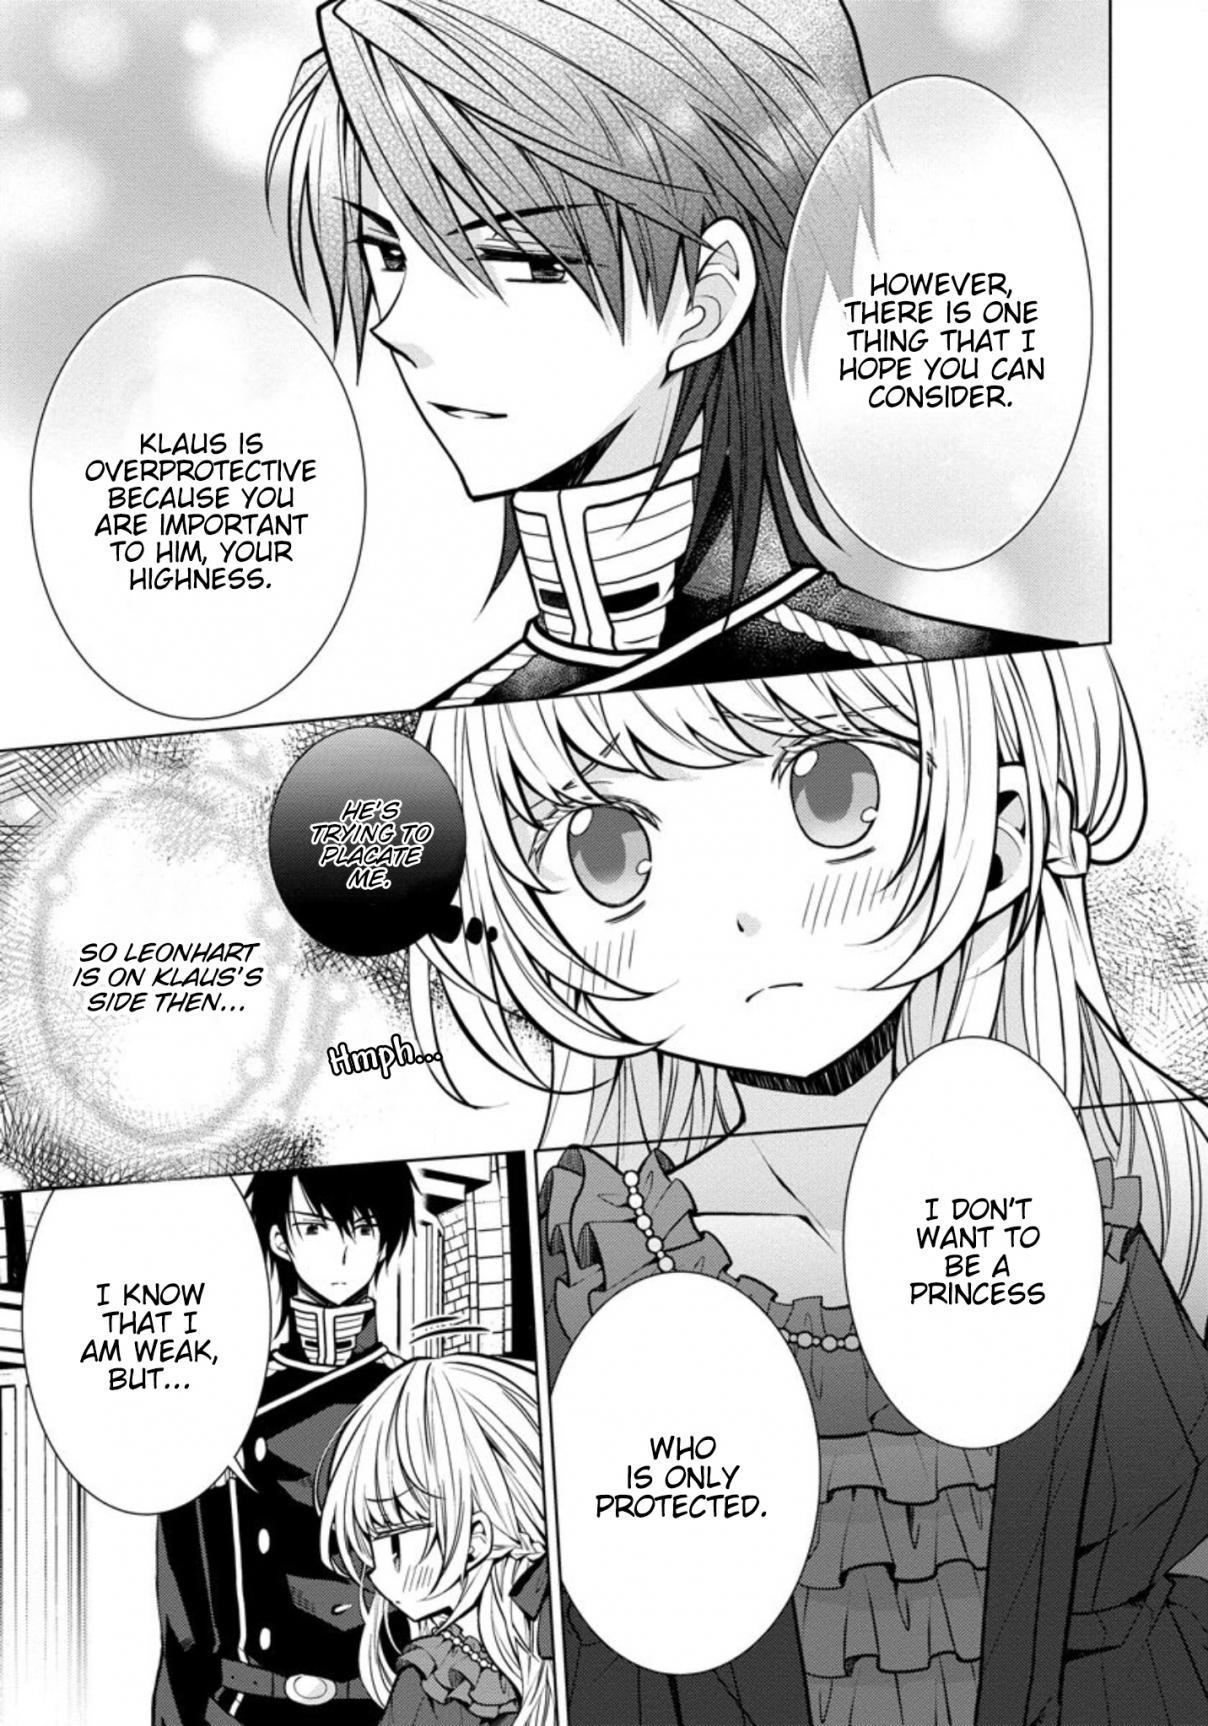 The Reincarnated Princess Strikes Down Flags Today as Well Vol. 1 Ch. 4